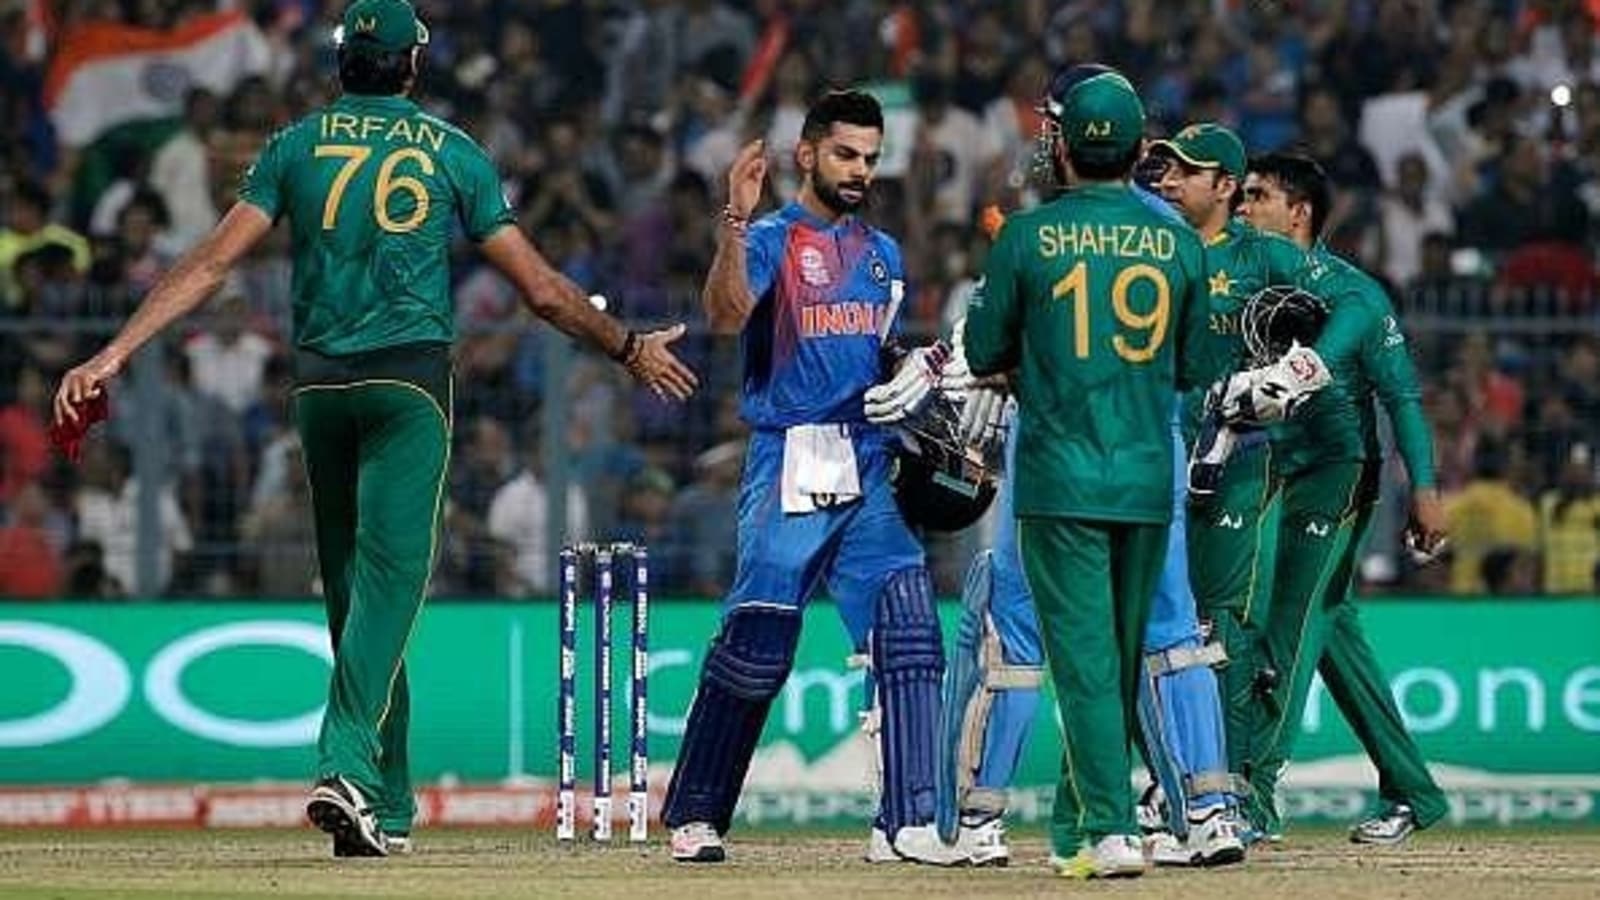 India vs Pakistan, 50 The long and short story of India's dominance